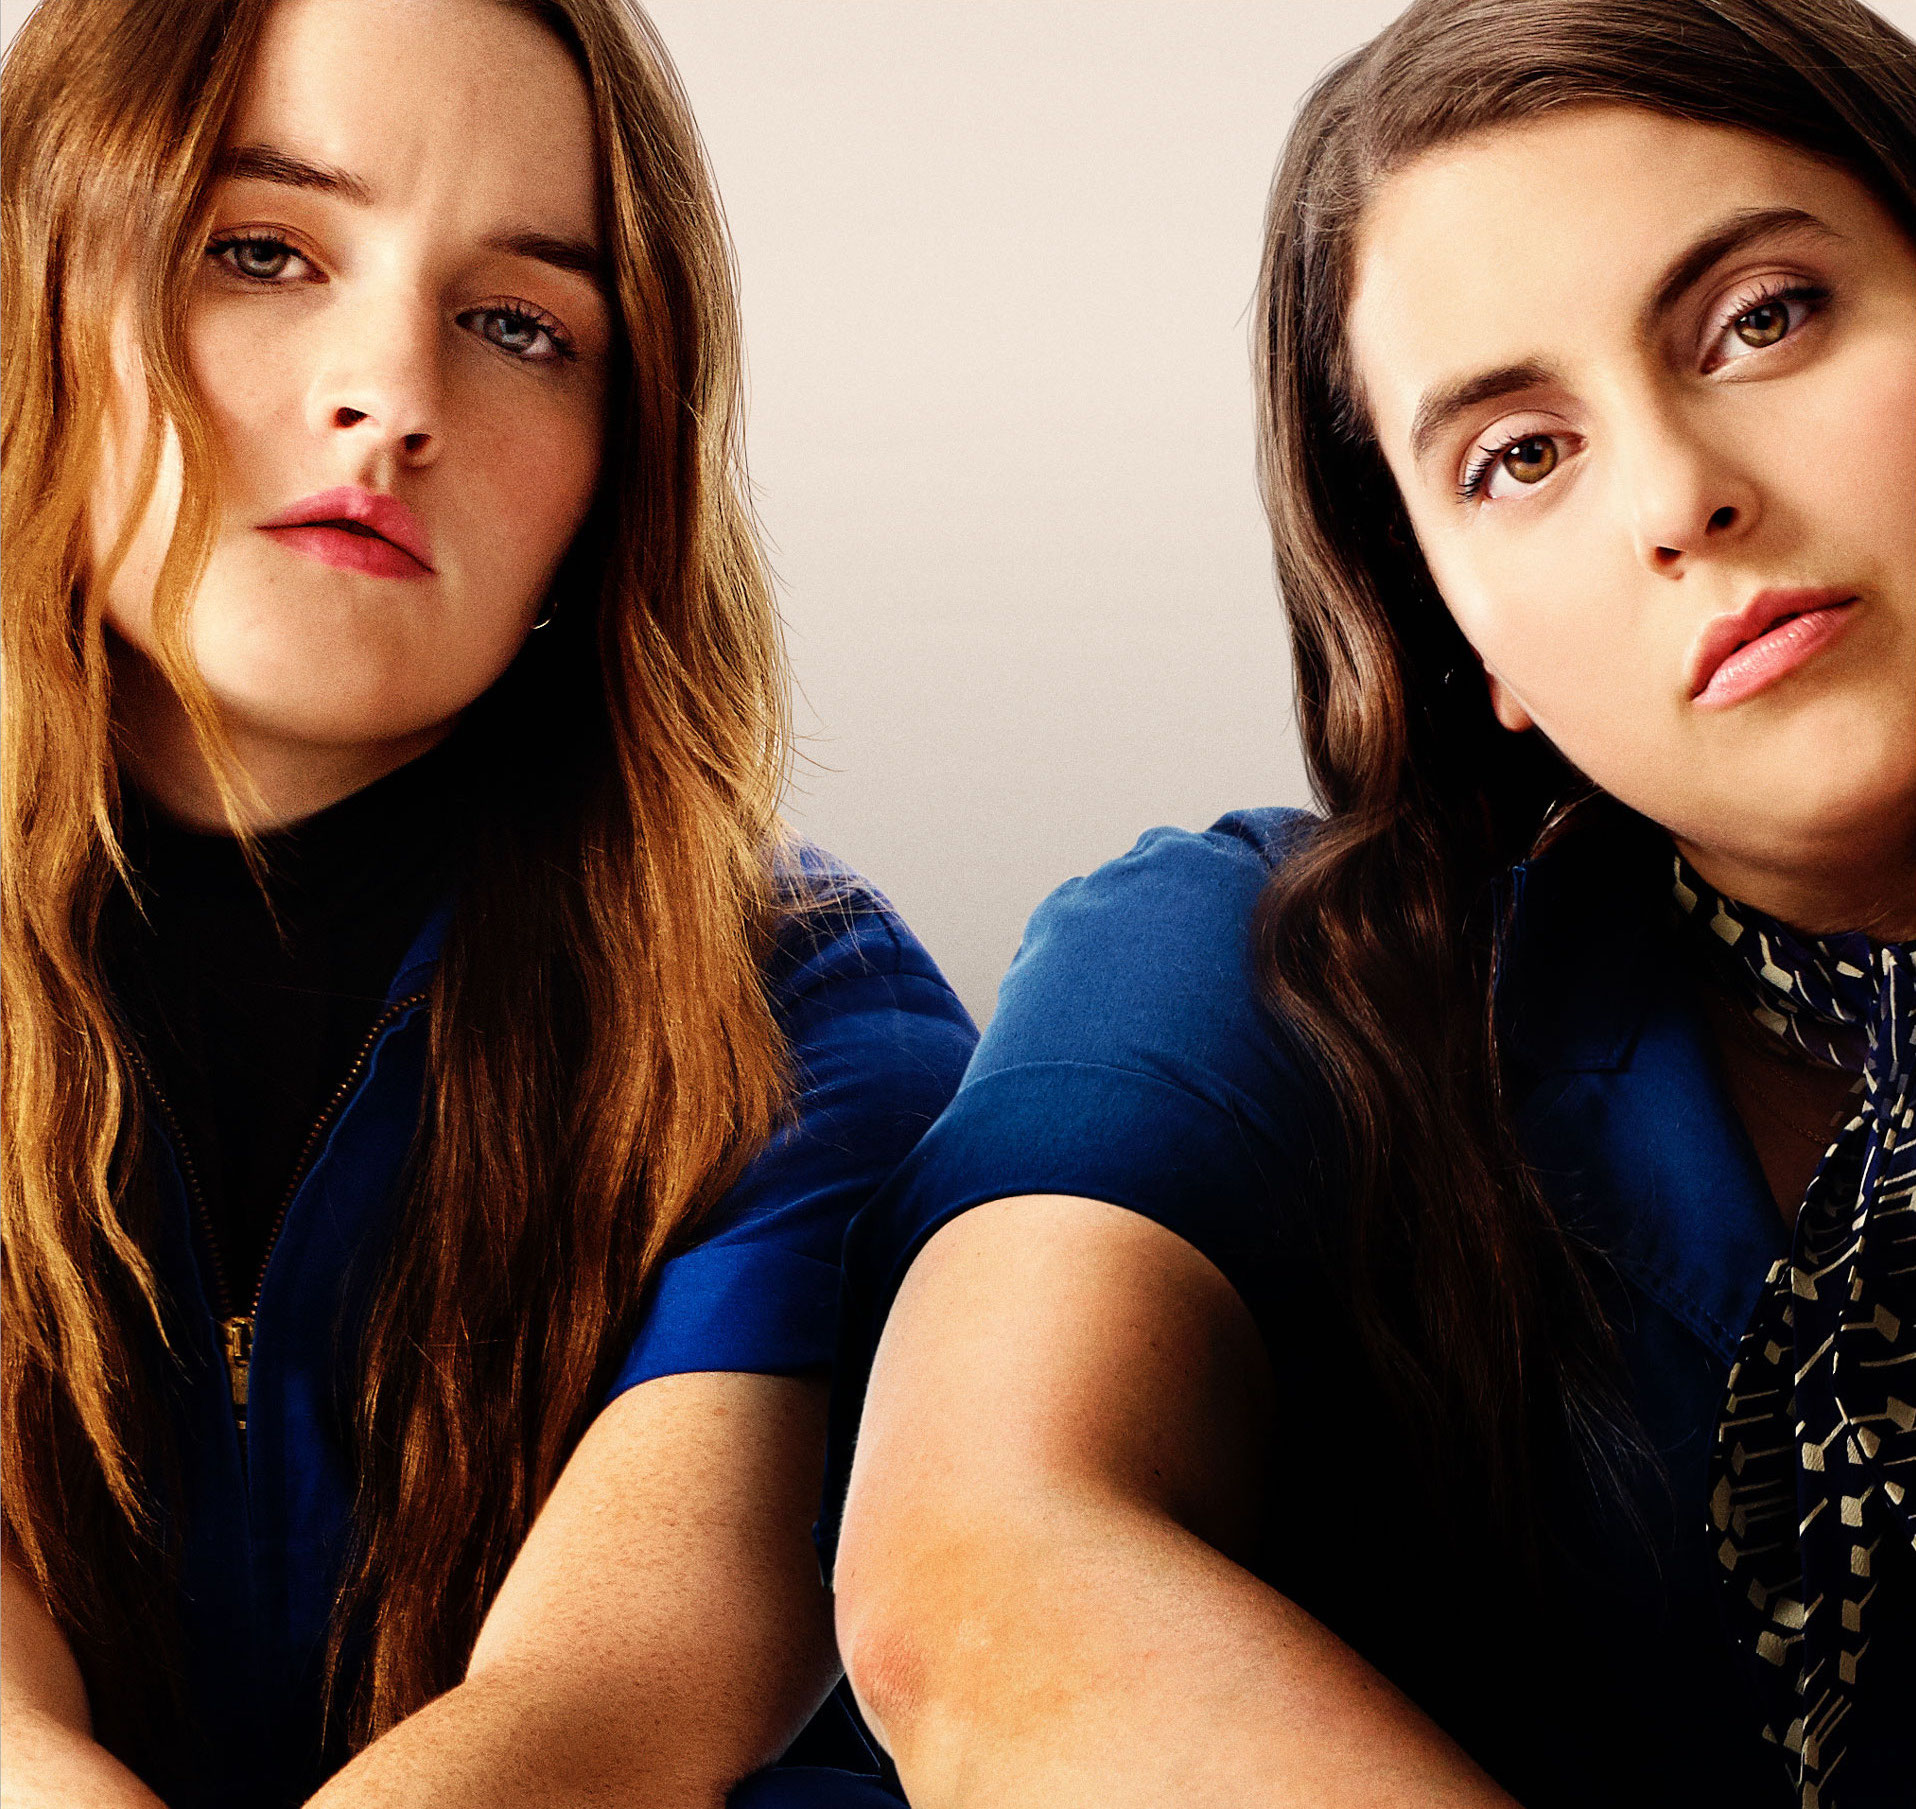 REVIEW: ‘Booksmart’ a solid blend of drama, comedy